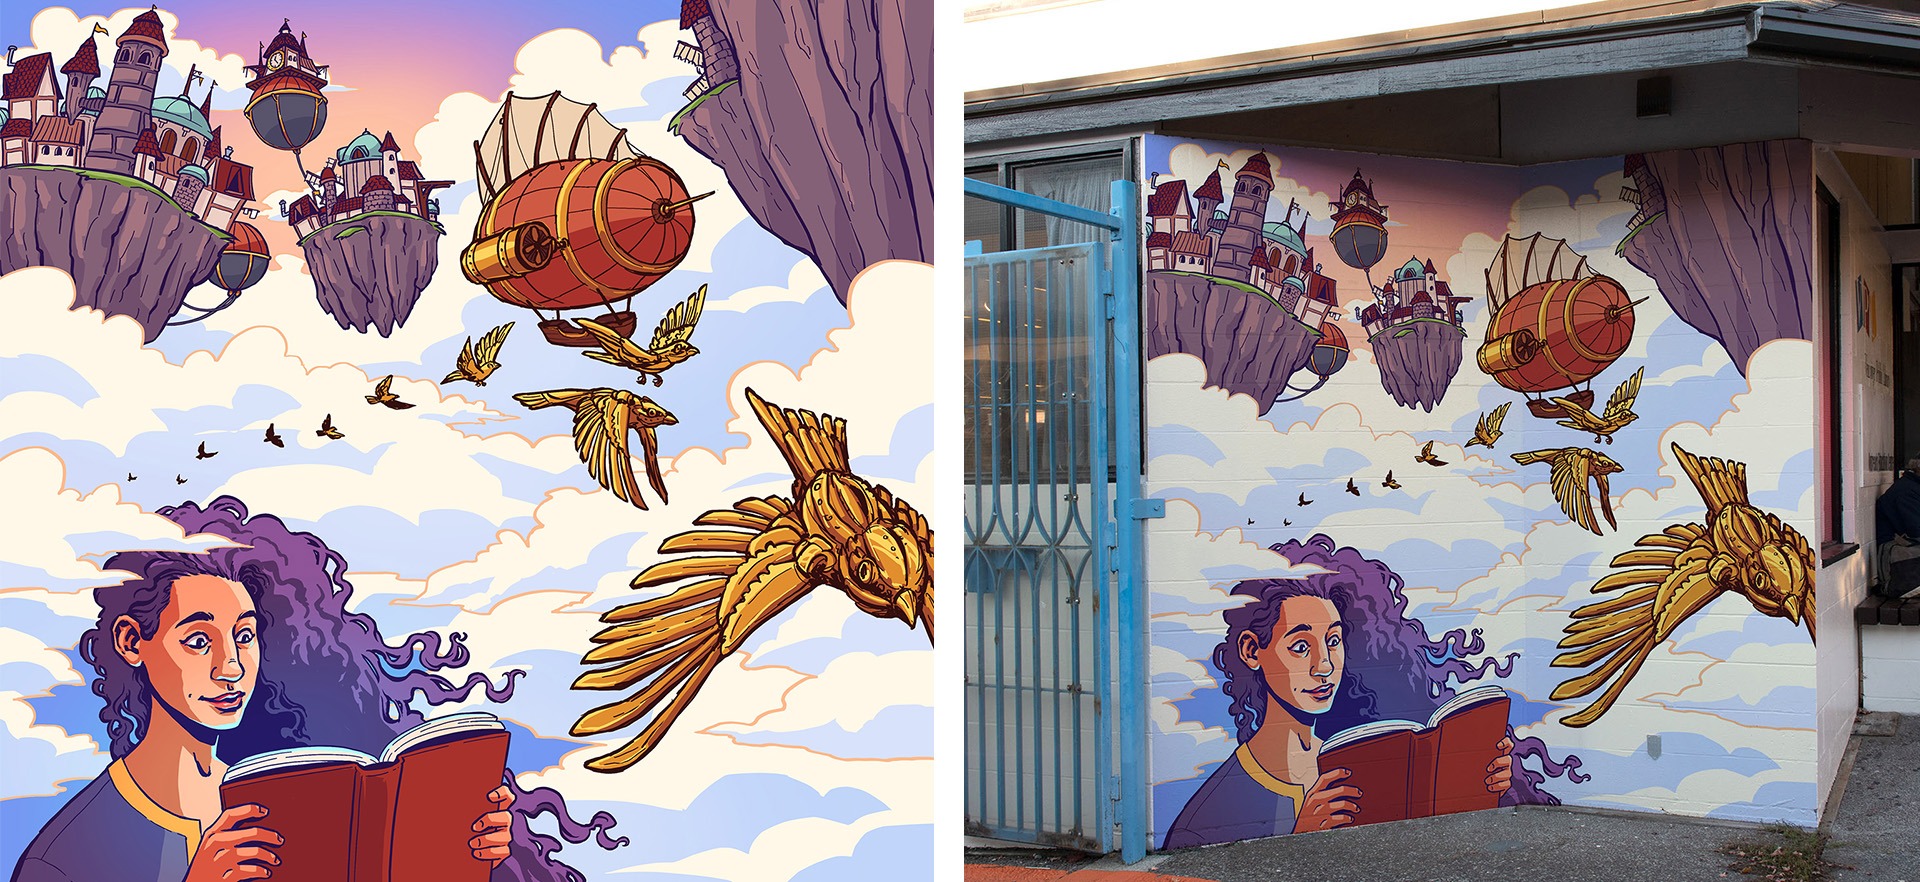 On the left, an illustration depicts a woman with flowing purple hair reading a book that gives off a magical blue light. Behind her, mechanical brass birds fly through a cloudscape with several rocky floating islands and a red steampunk airship. On the right, the same illustration is mocked up as a mural on an exterior white brick wall.